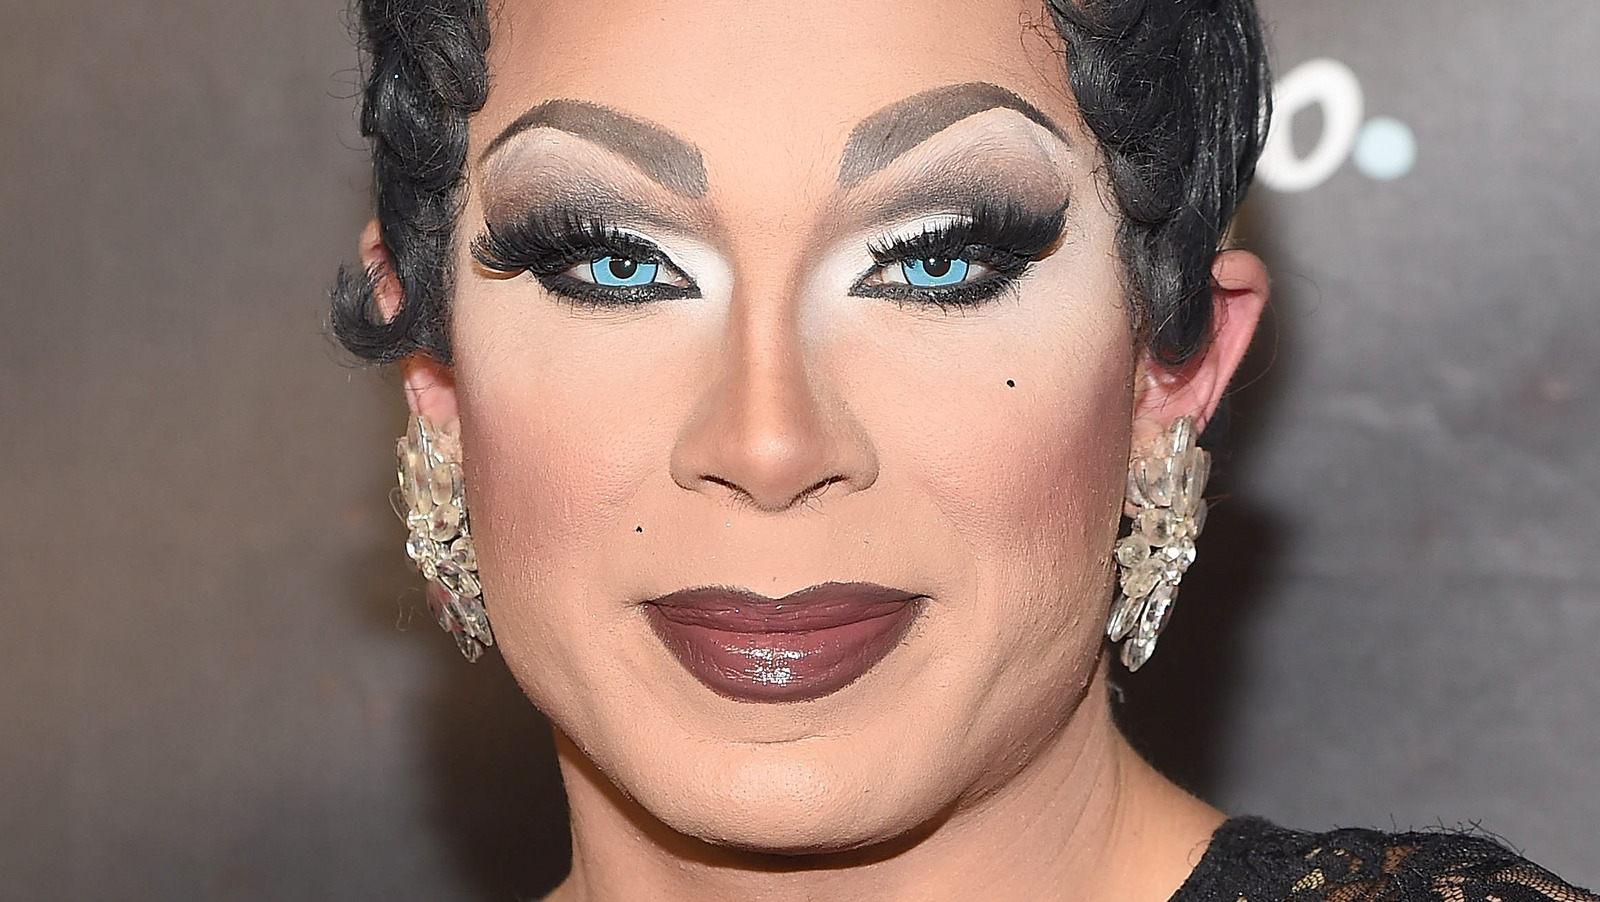 What happened to Jade Sotomayor after RuPaul’s Drag Race was over?